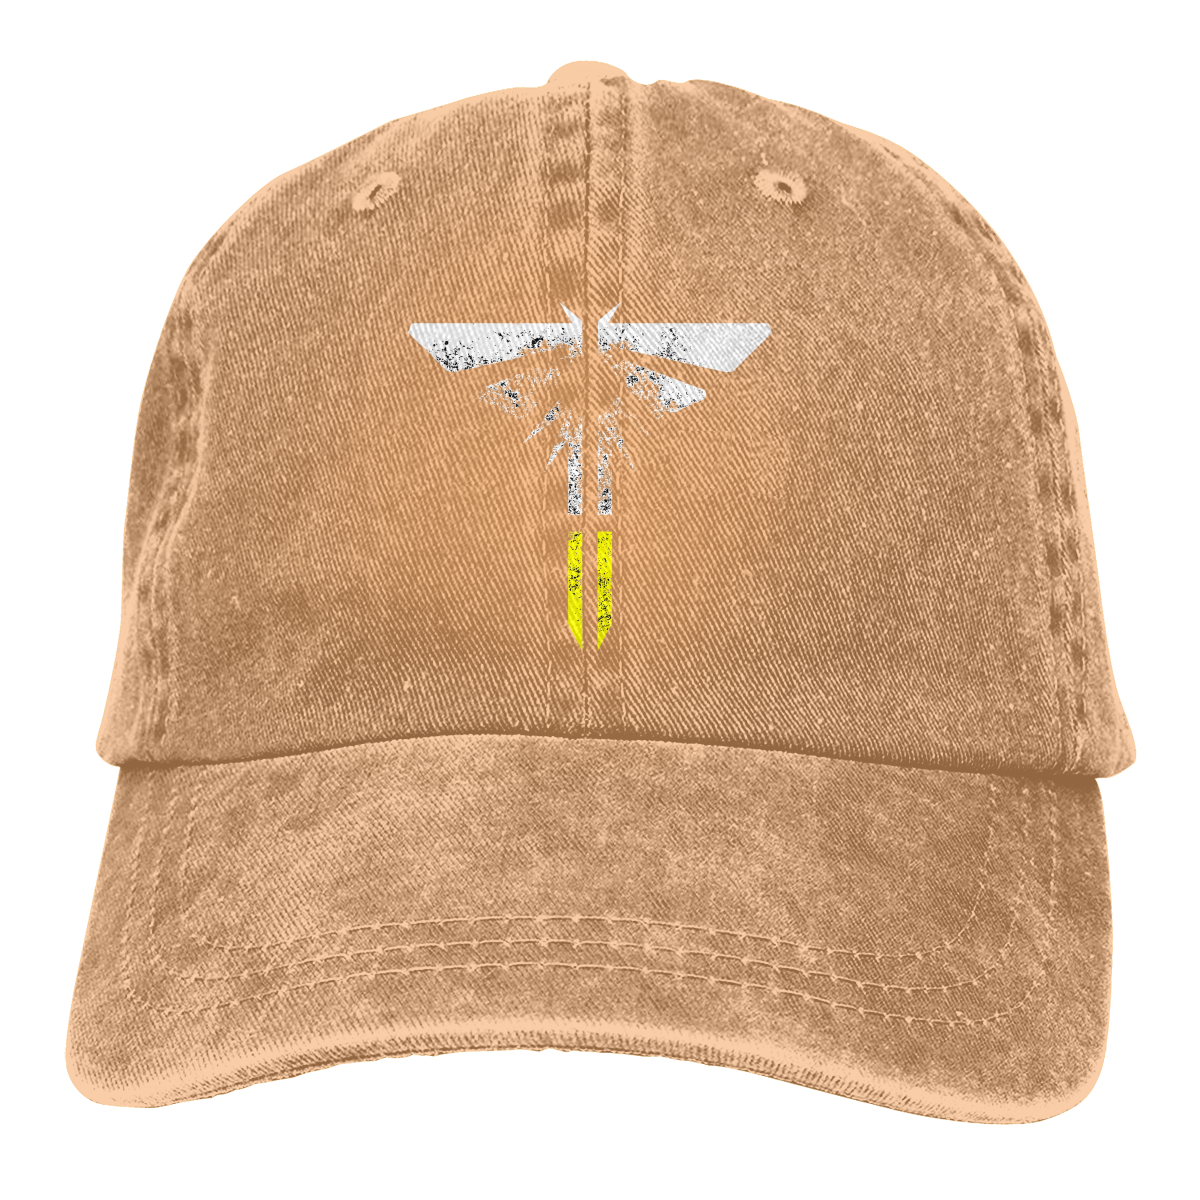 The Last Of Us Part II Firefly Light Eroded Baseball Cap cowboy hat Peaked cap the last of us Hats